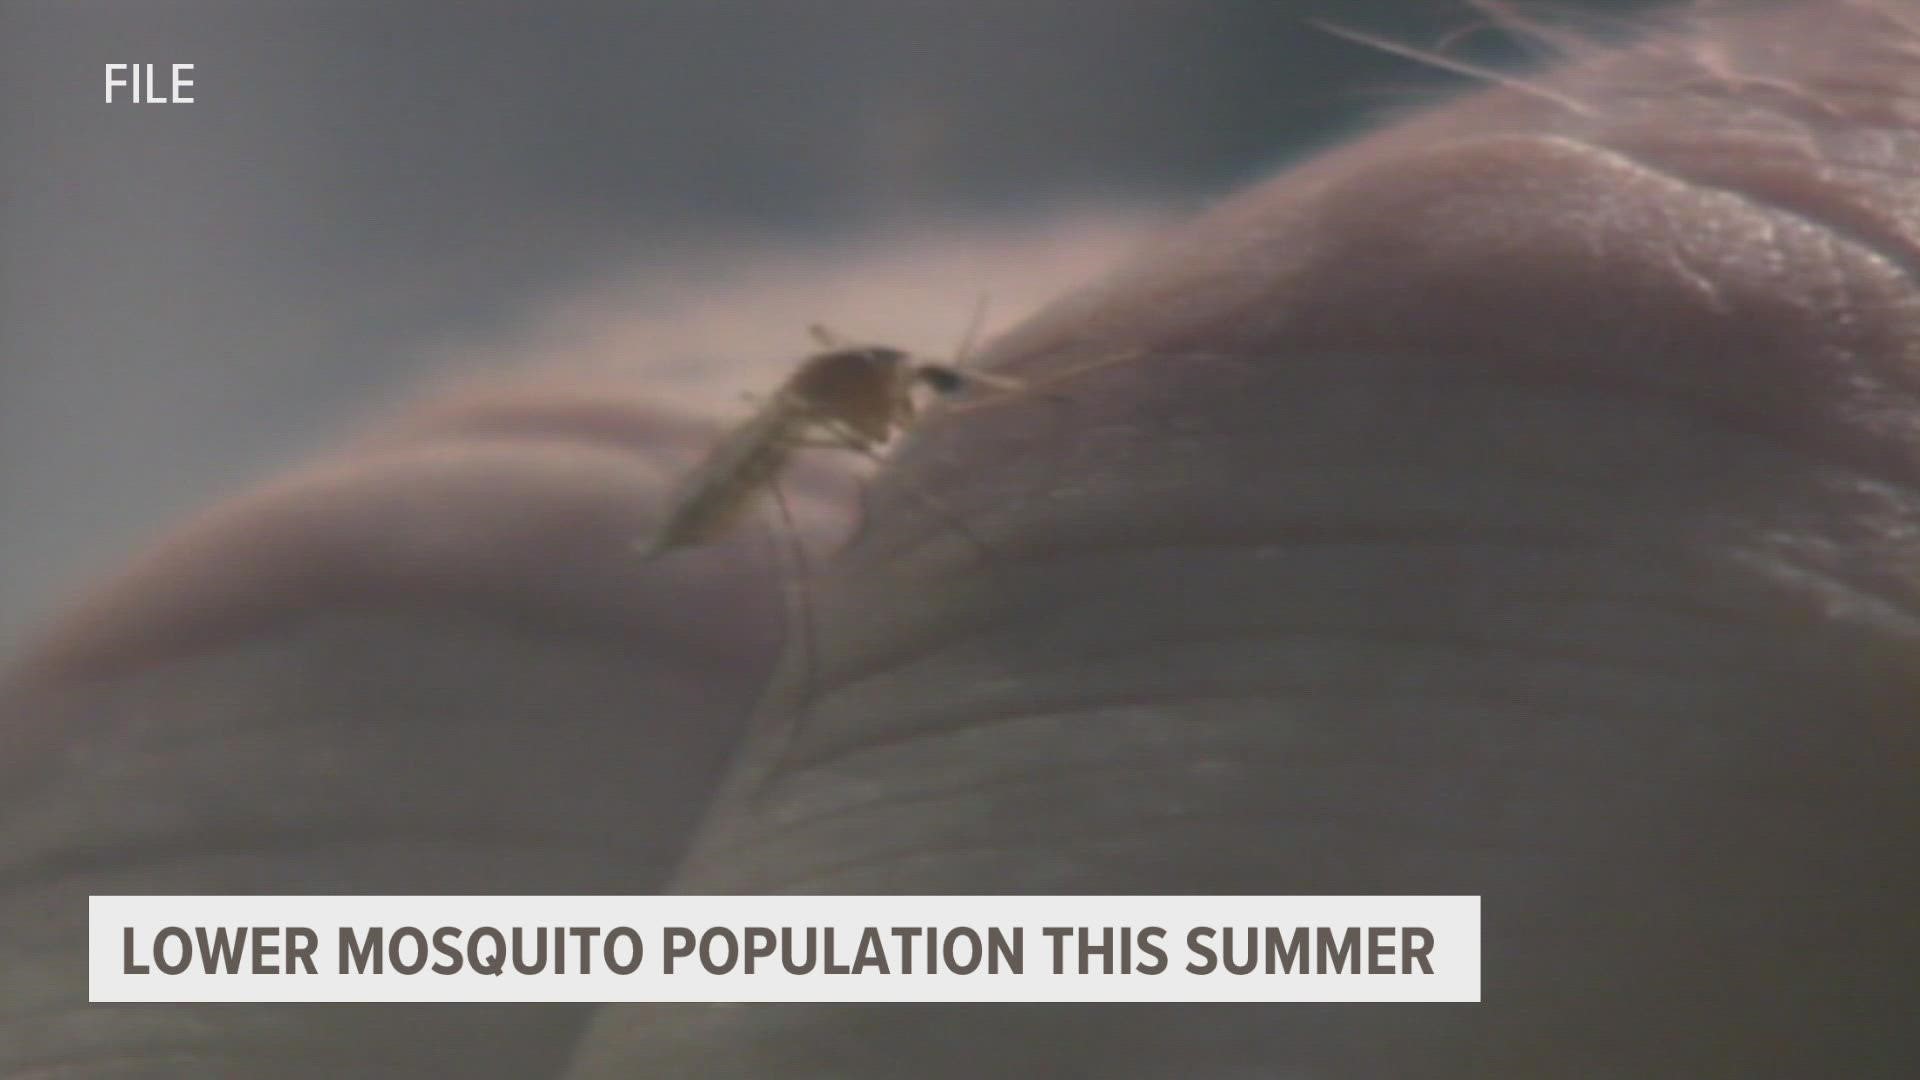 If you're noticing you don't have as many mosquito bites this summer, there's a reason.